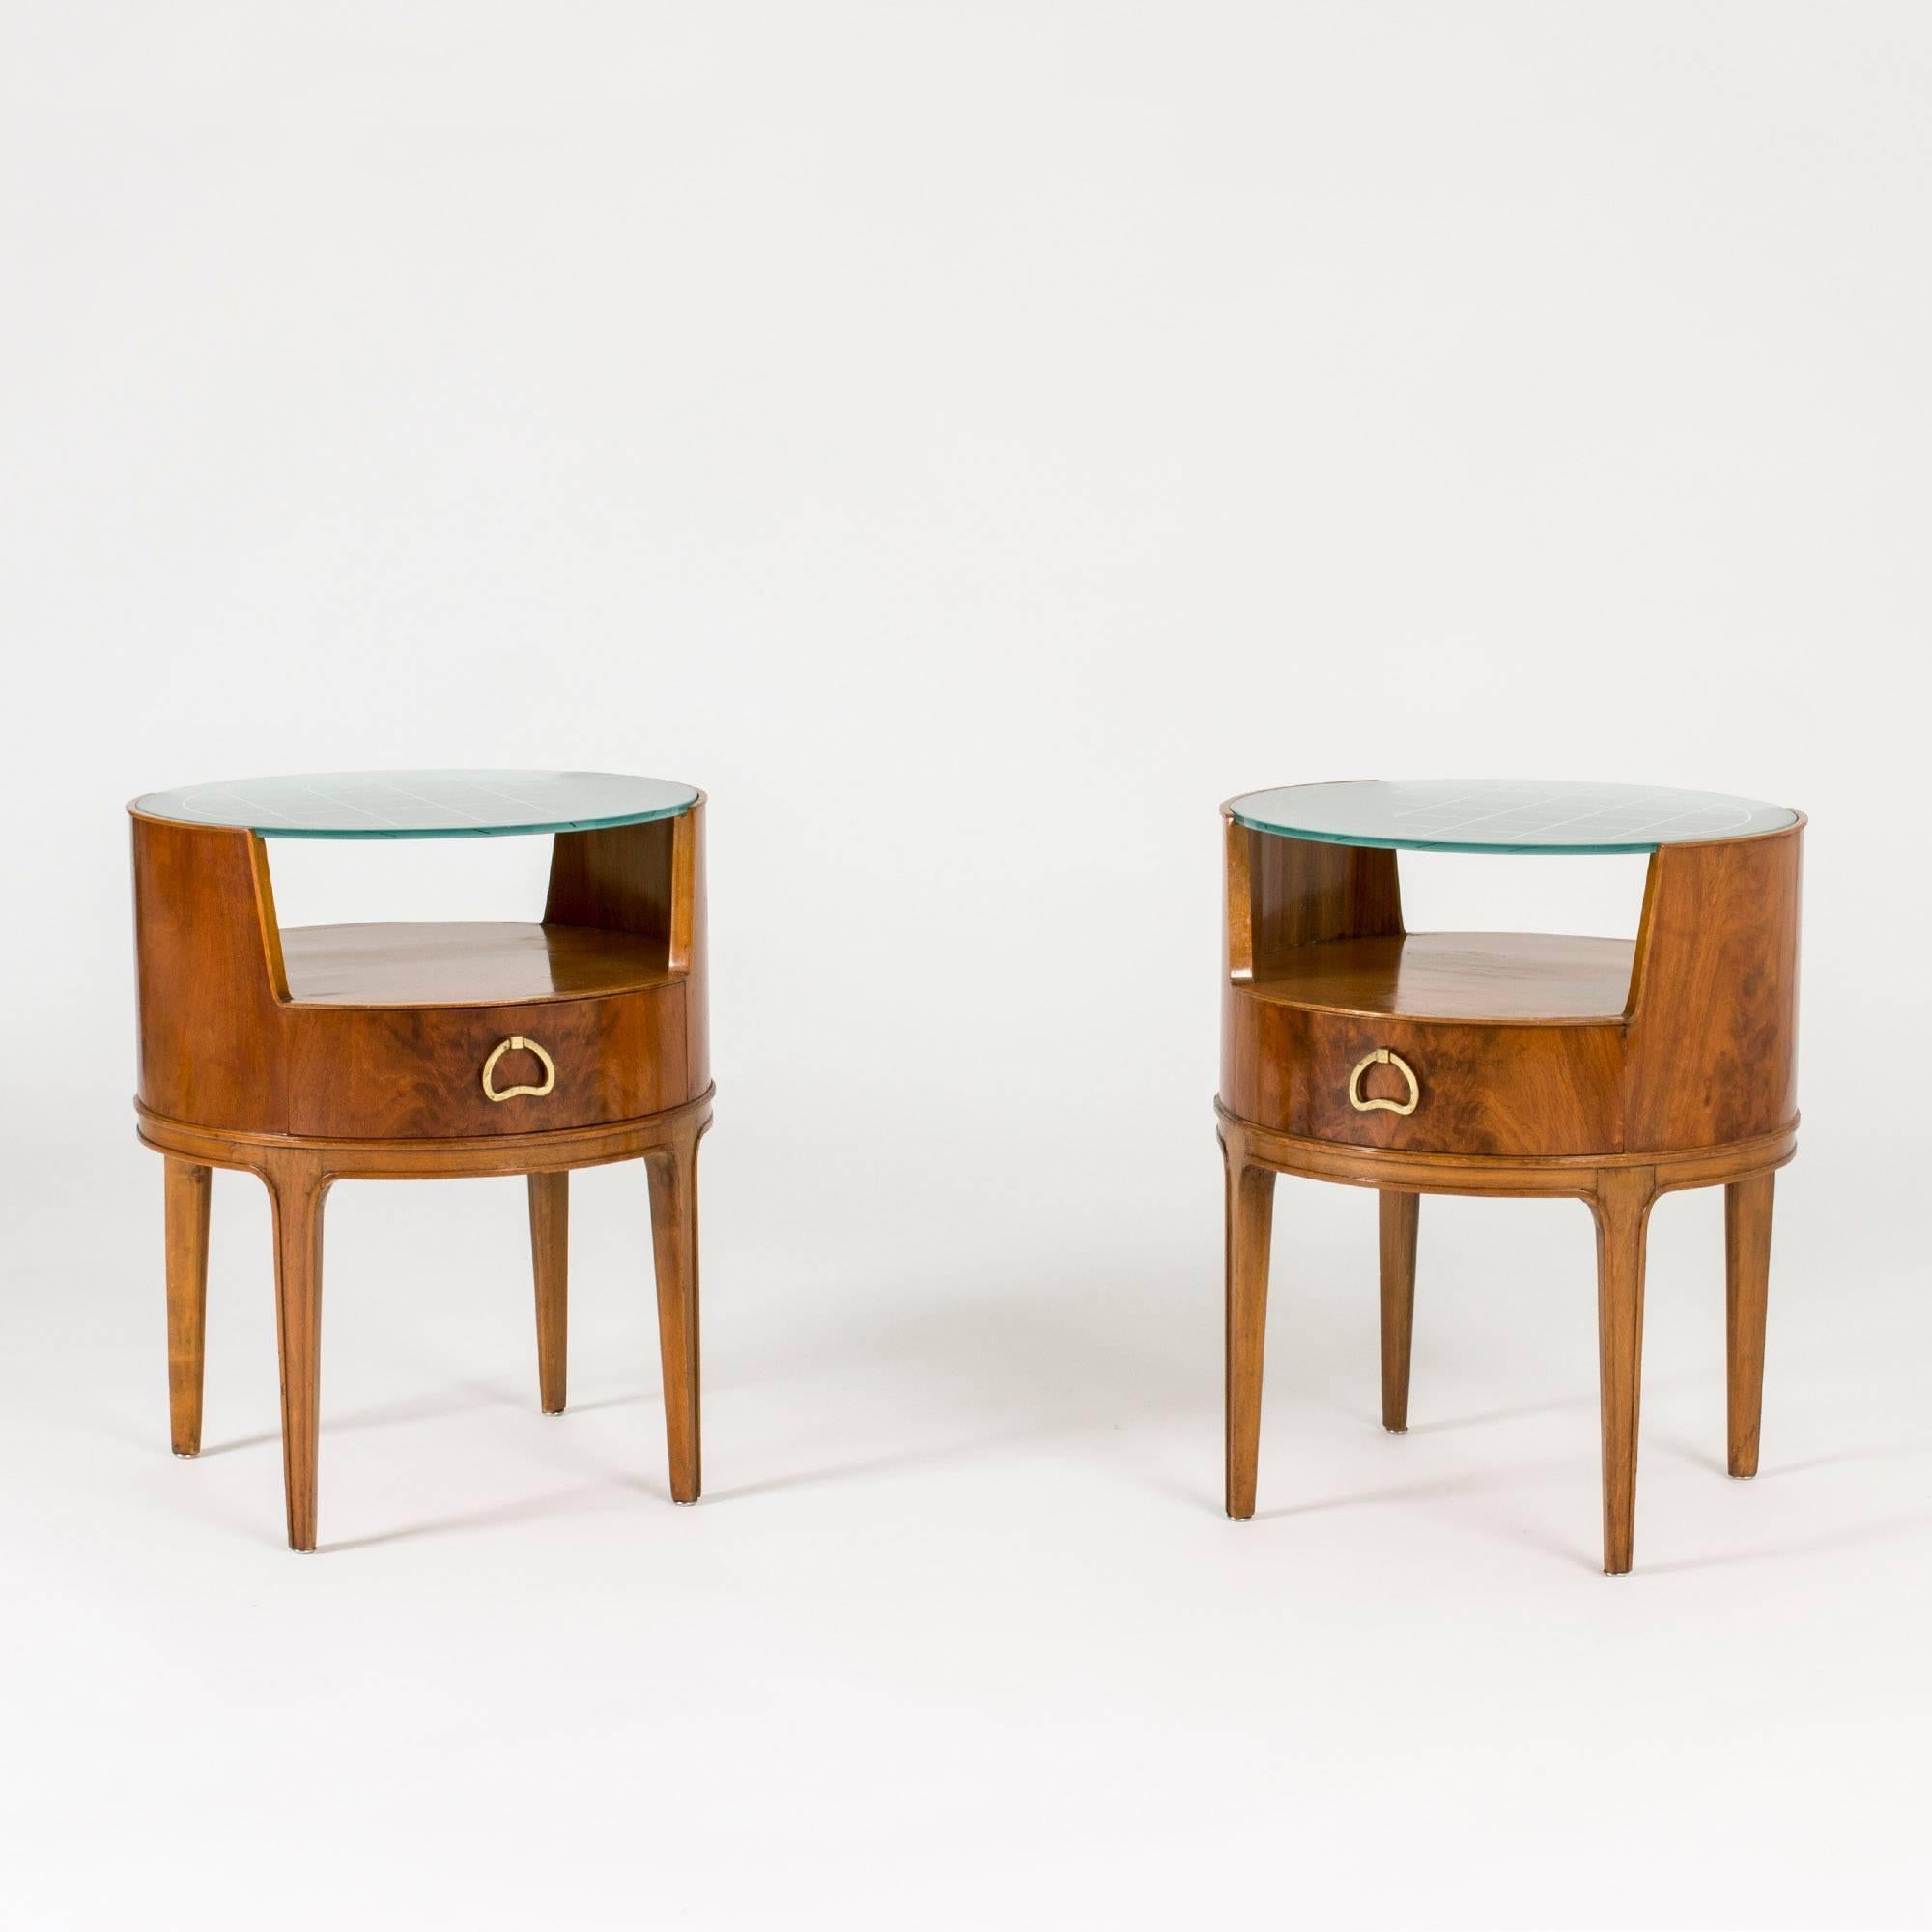 Pair of beautiful bedside tables by Axel Larsson, with pyramid mahogany veneer, green tinted glass tops and sculpted brass handles. The glass tops have an etched checkered pattern.